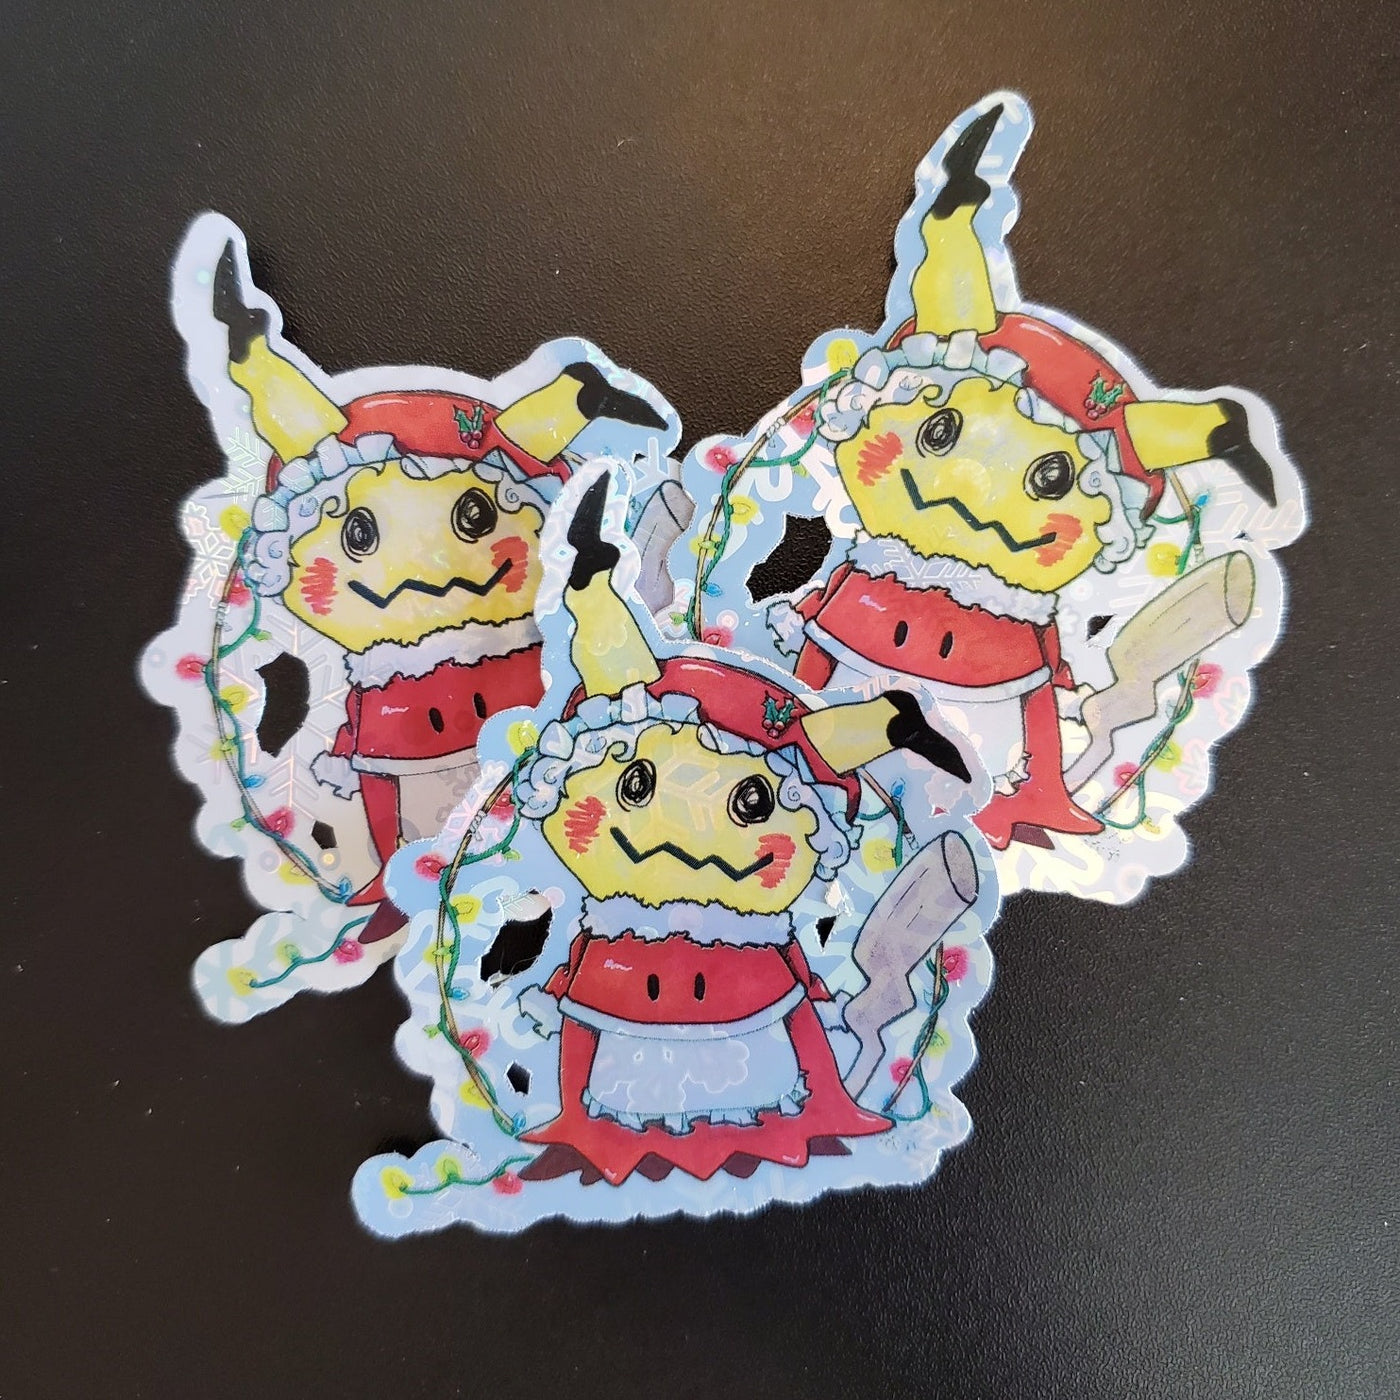 Mrs. Mimiclause Holographic Sticker - Waterproof Vinyl